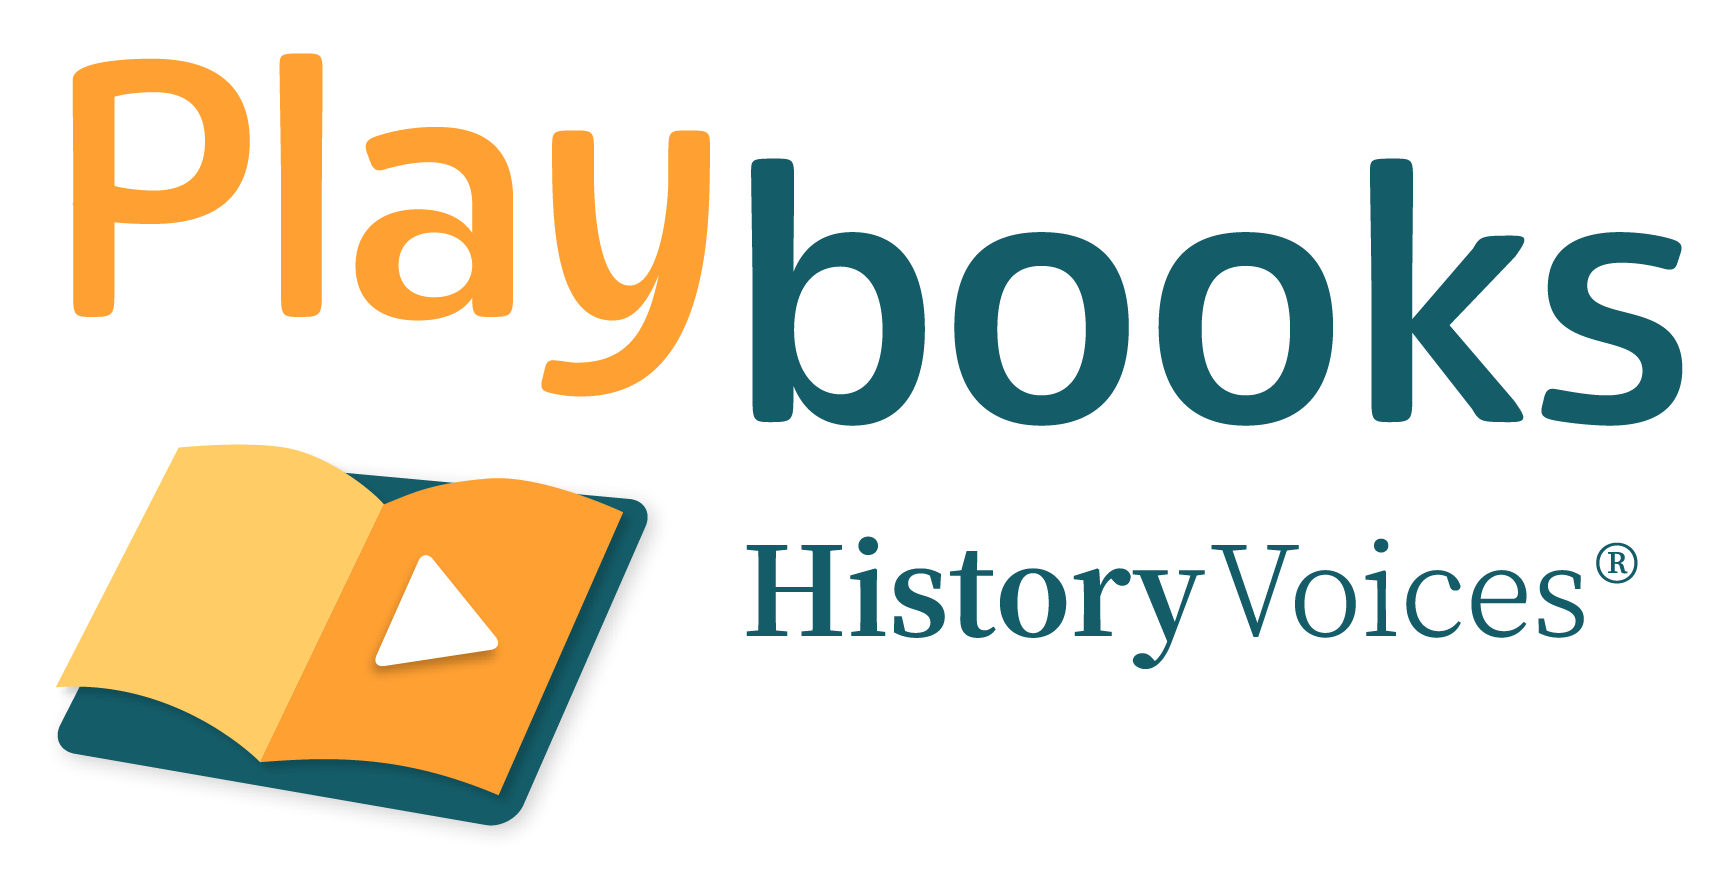 History Voices